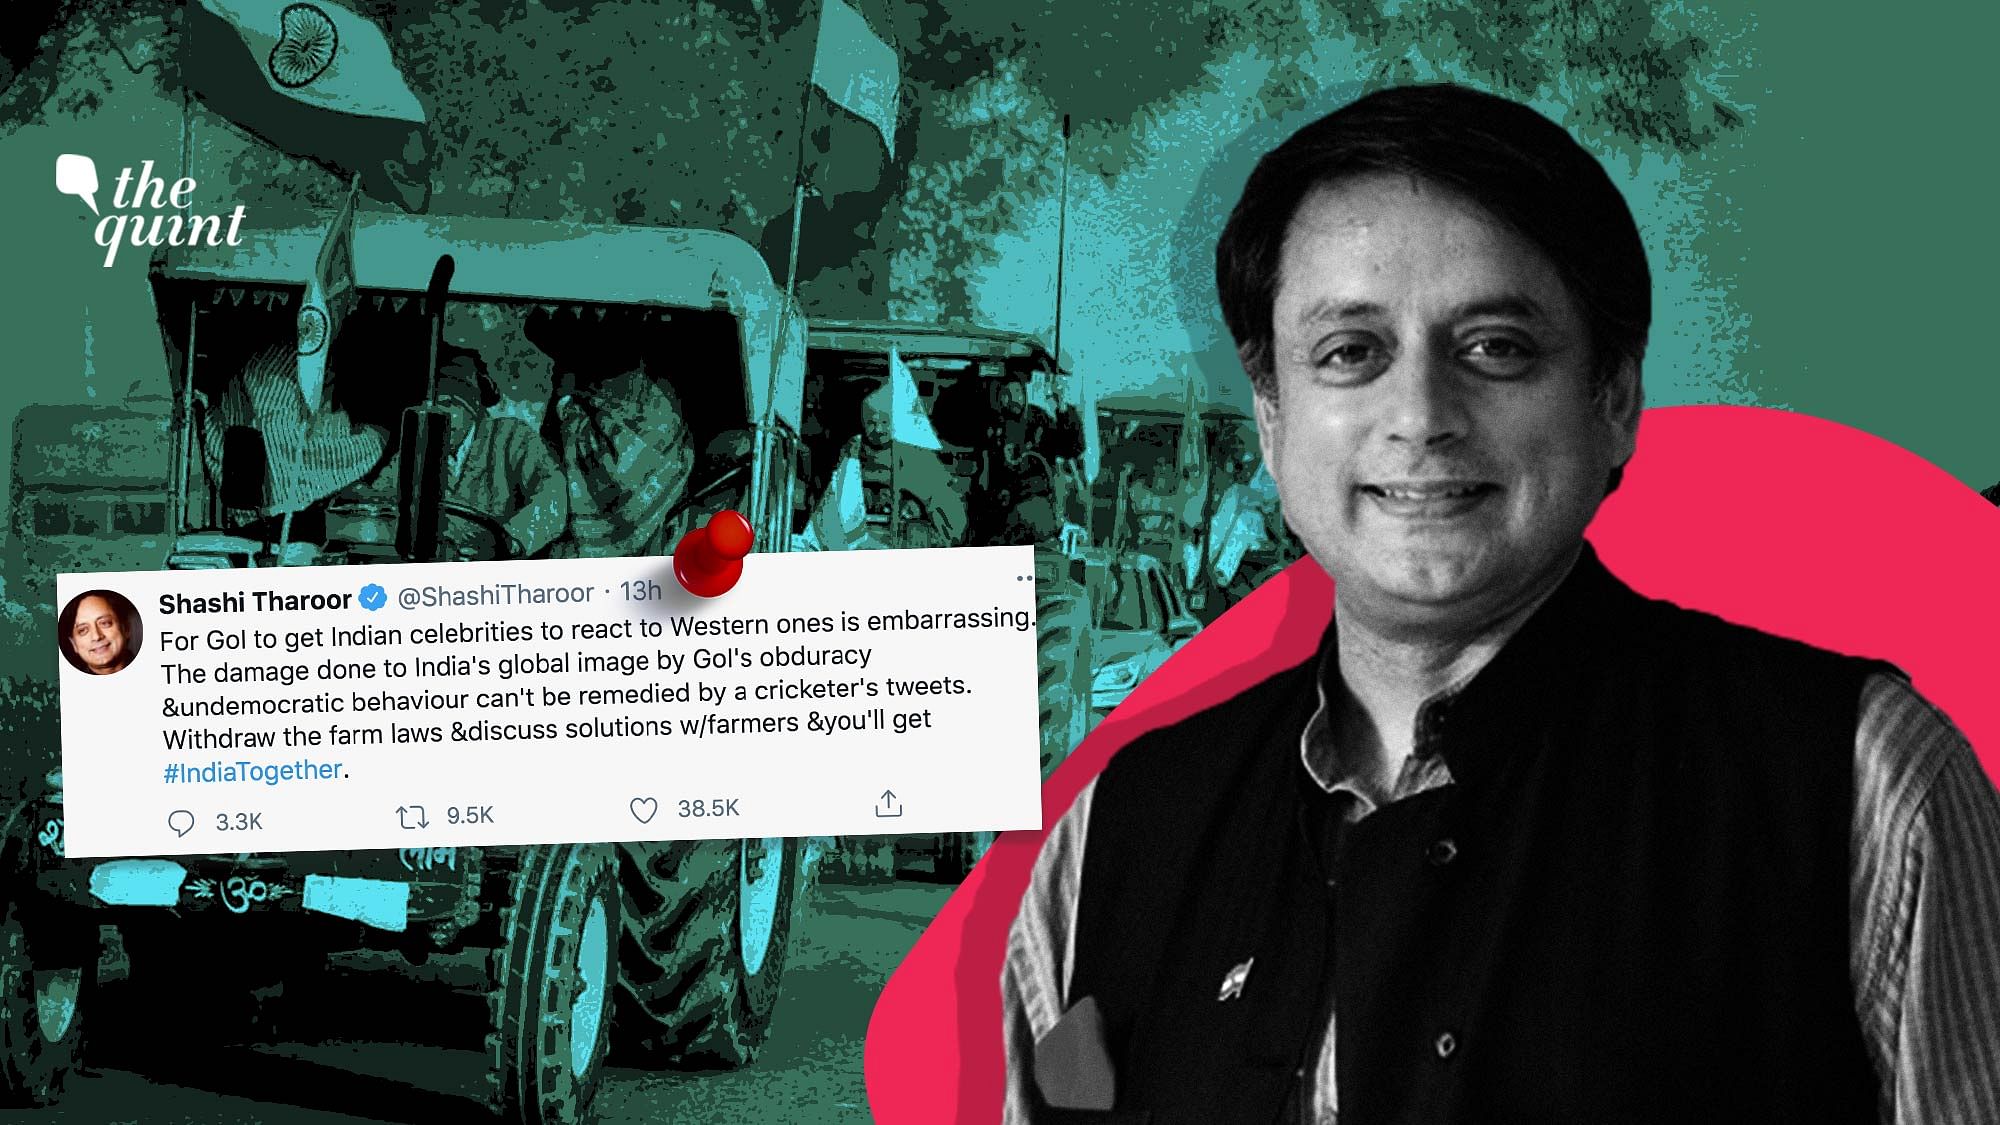 Image of Dr Shashi Tharoor used for representational purposes.